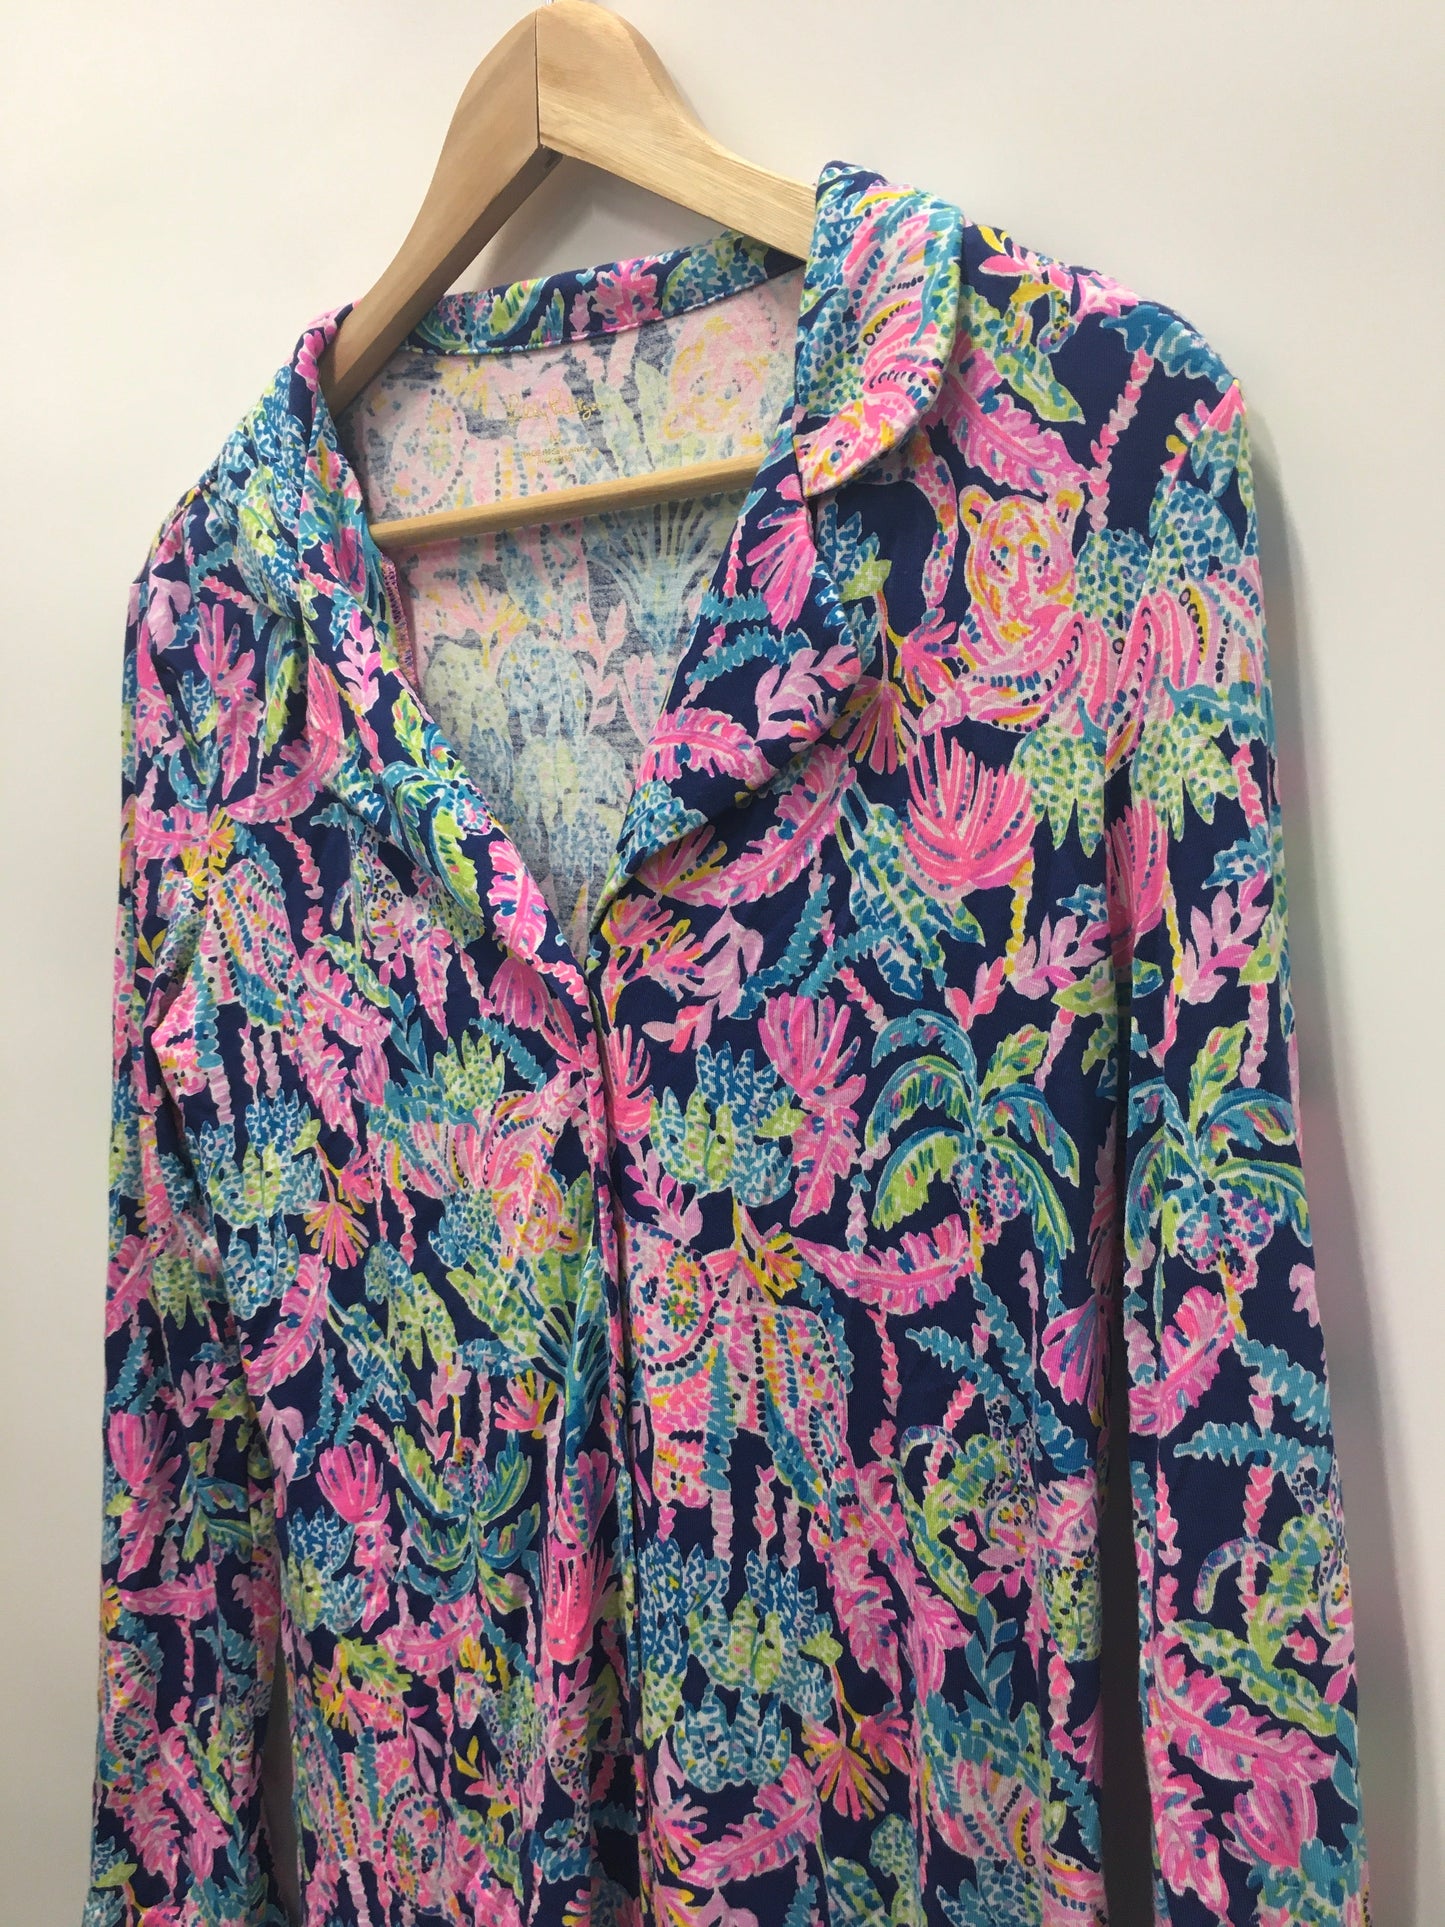 Multi-colored Top Long Sleeve Lilly Pulitzer, Size M